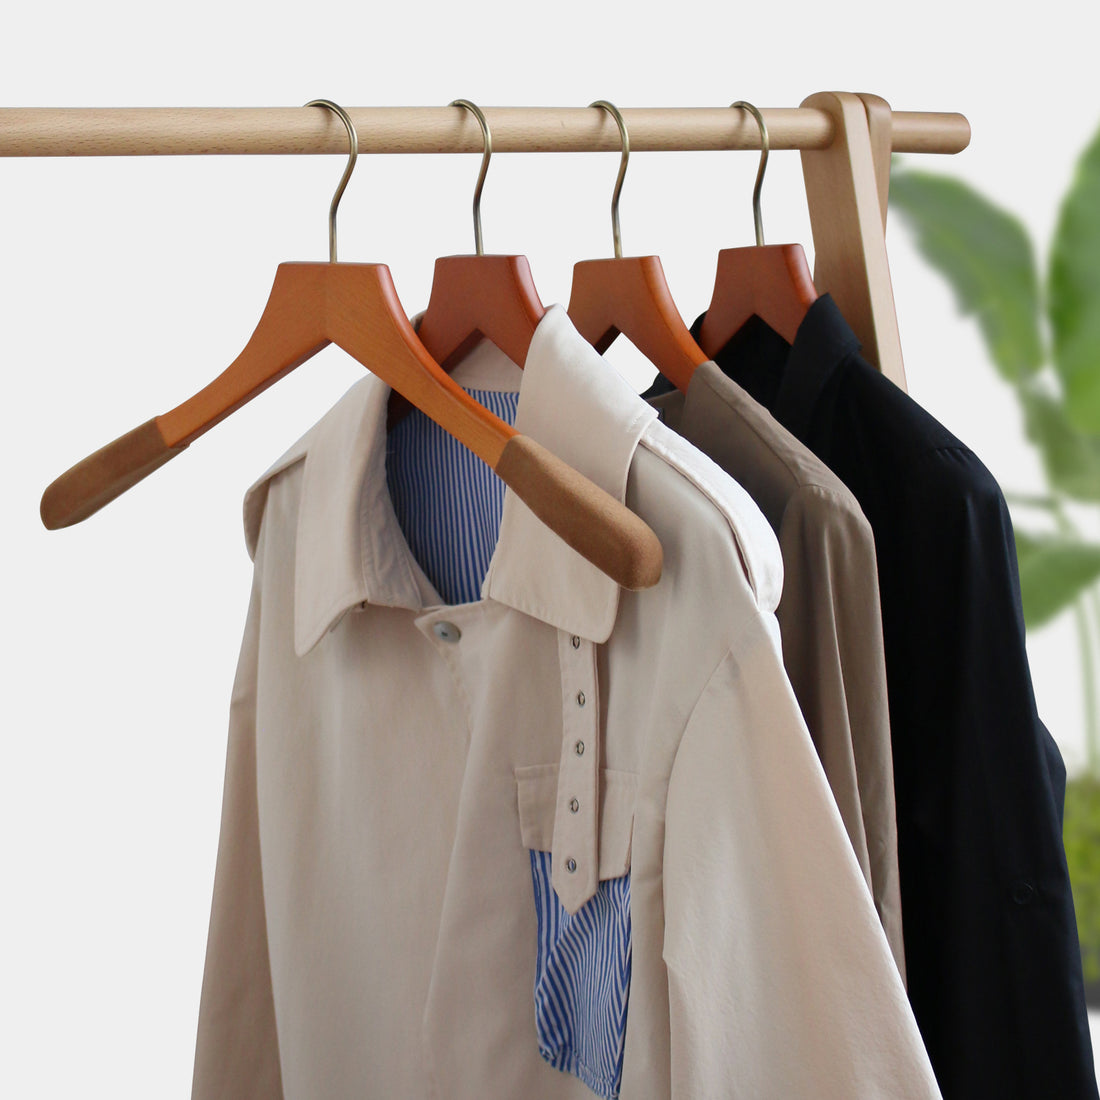 What if the hanger can't hold the clothes? 4 kinds of non-slip methods to help you get rid of the trouble